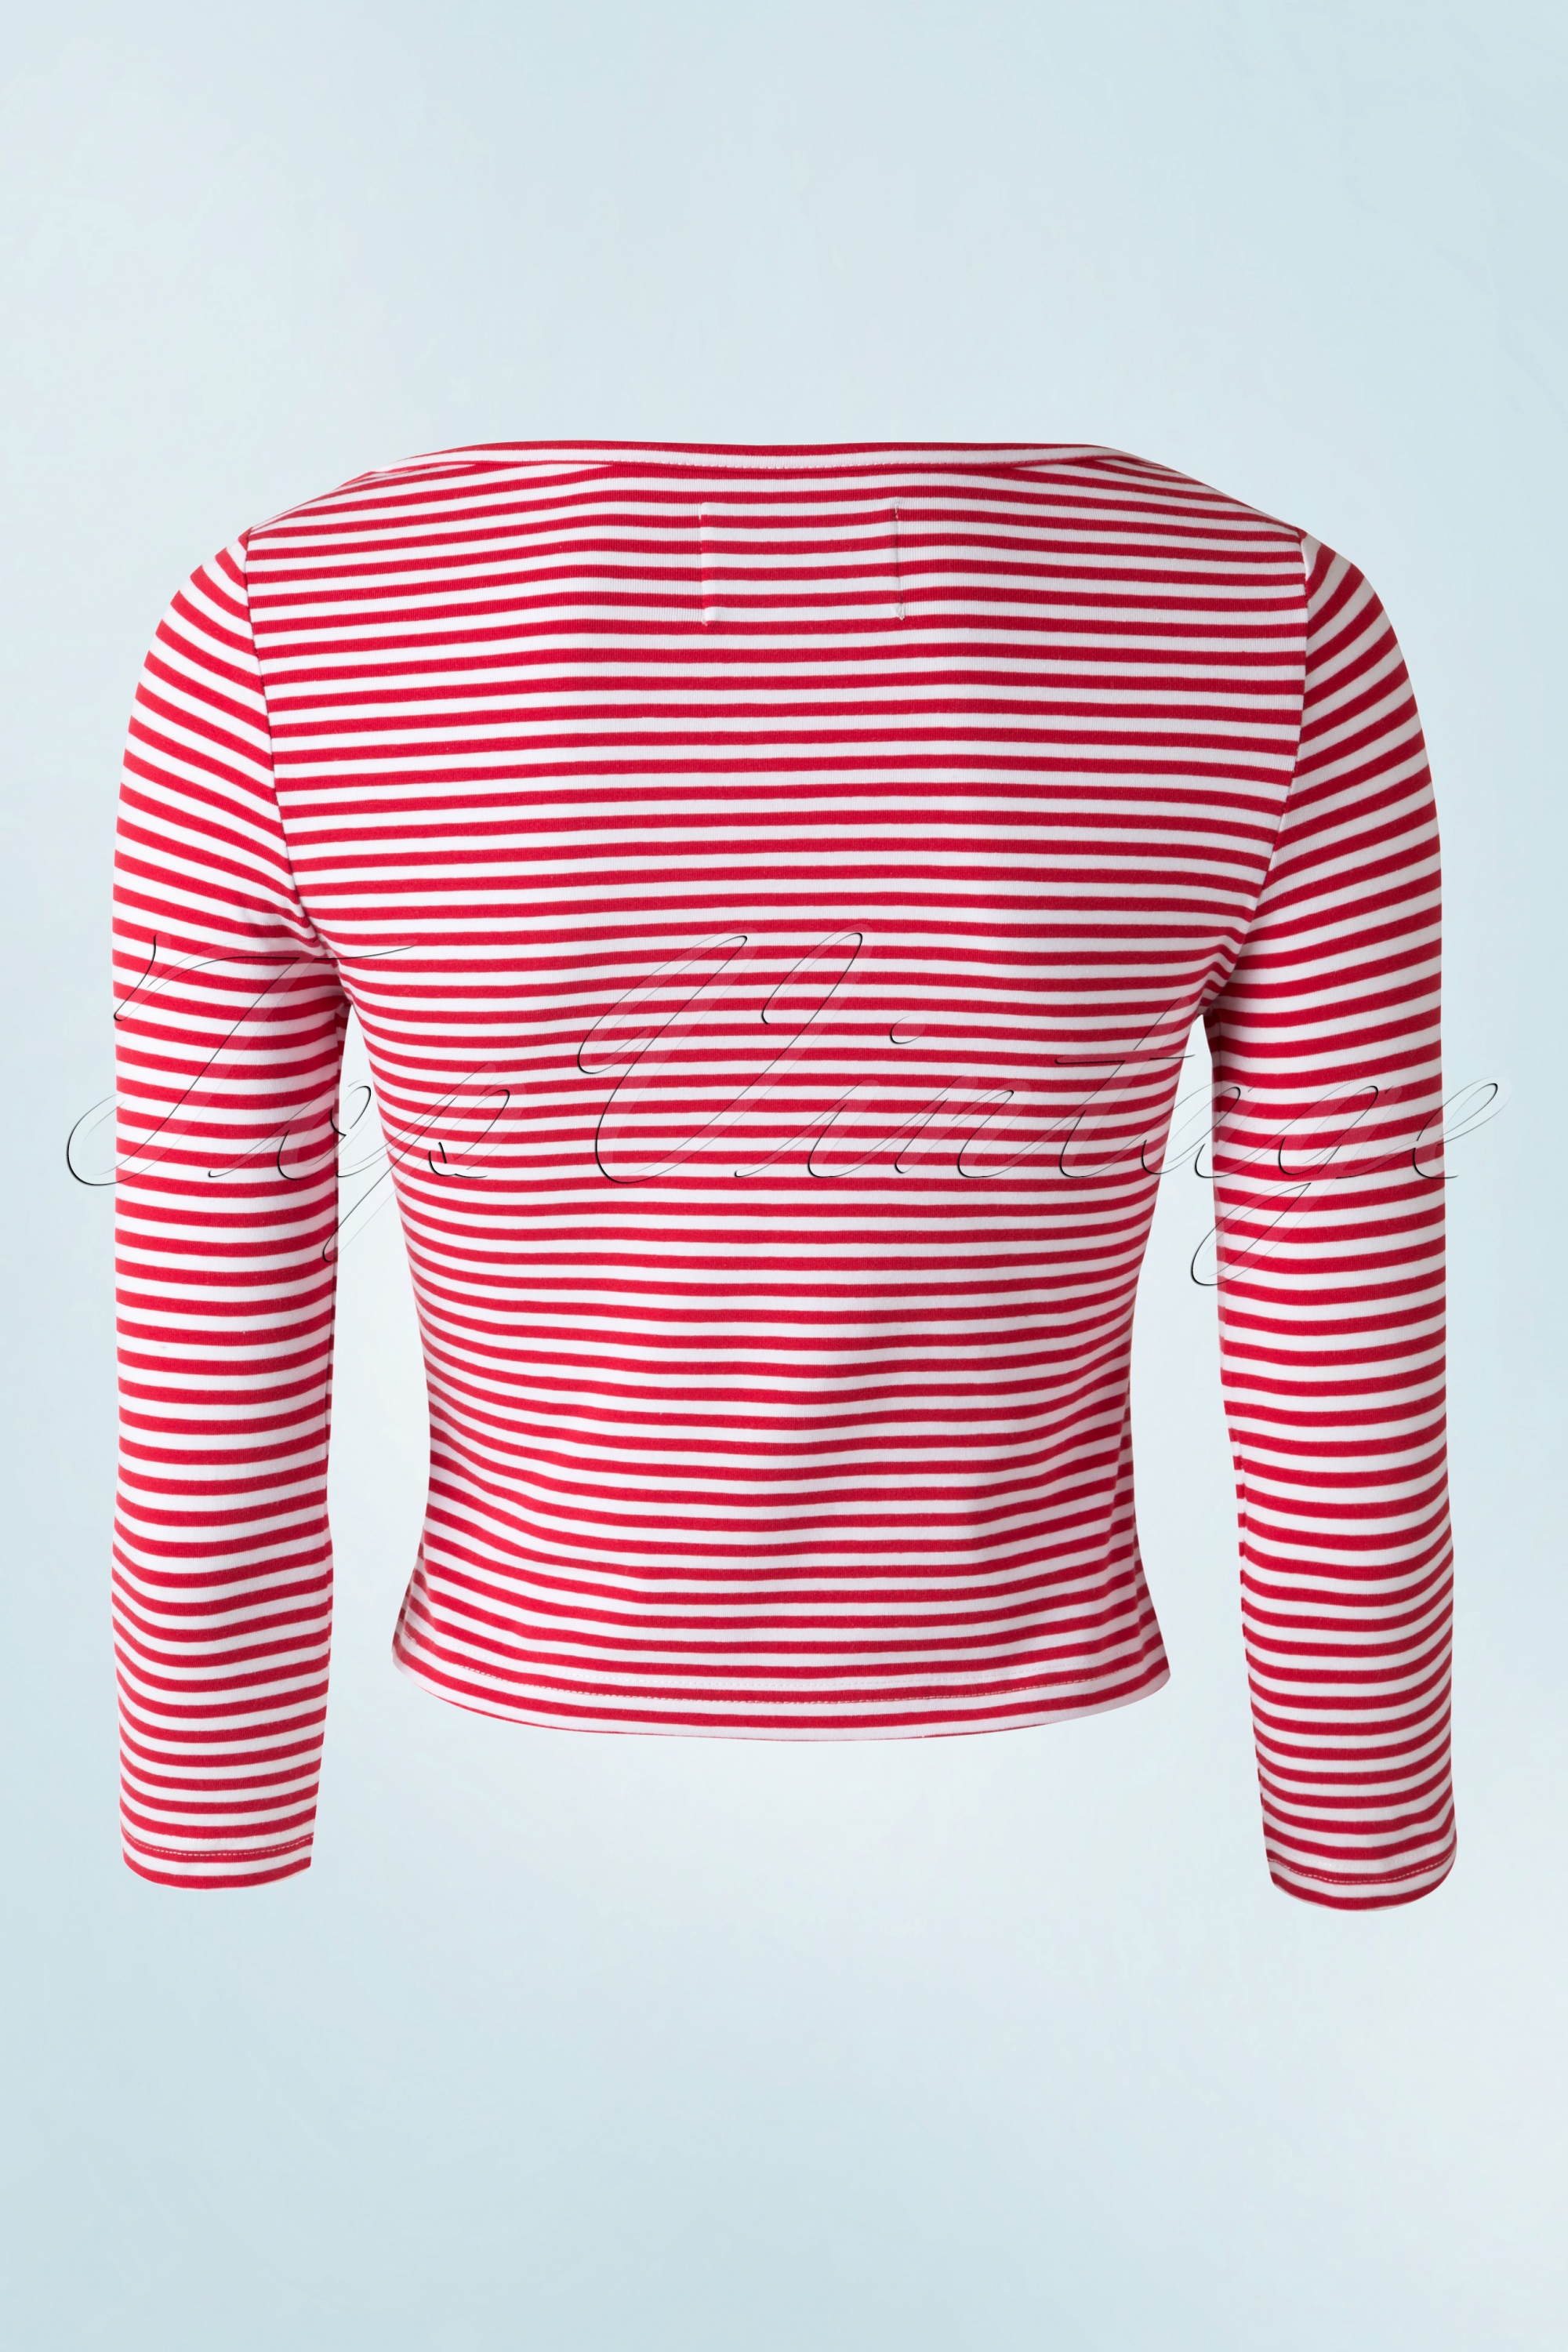 Collectif Clothing - Martina T-shirt met dunne strepen en boothals in rood 4